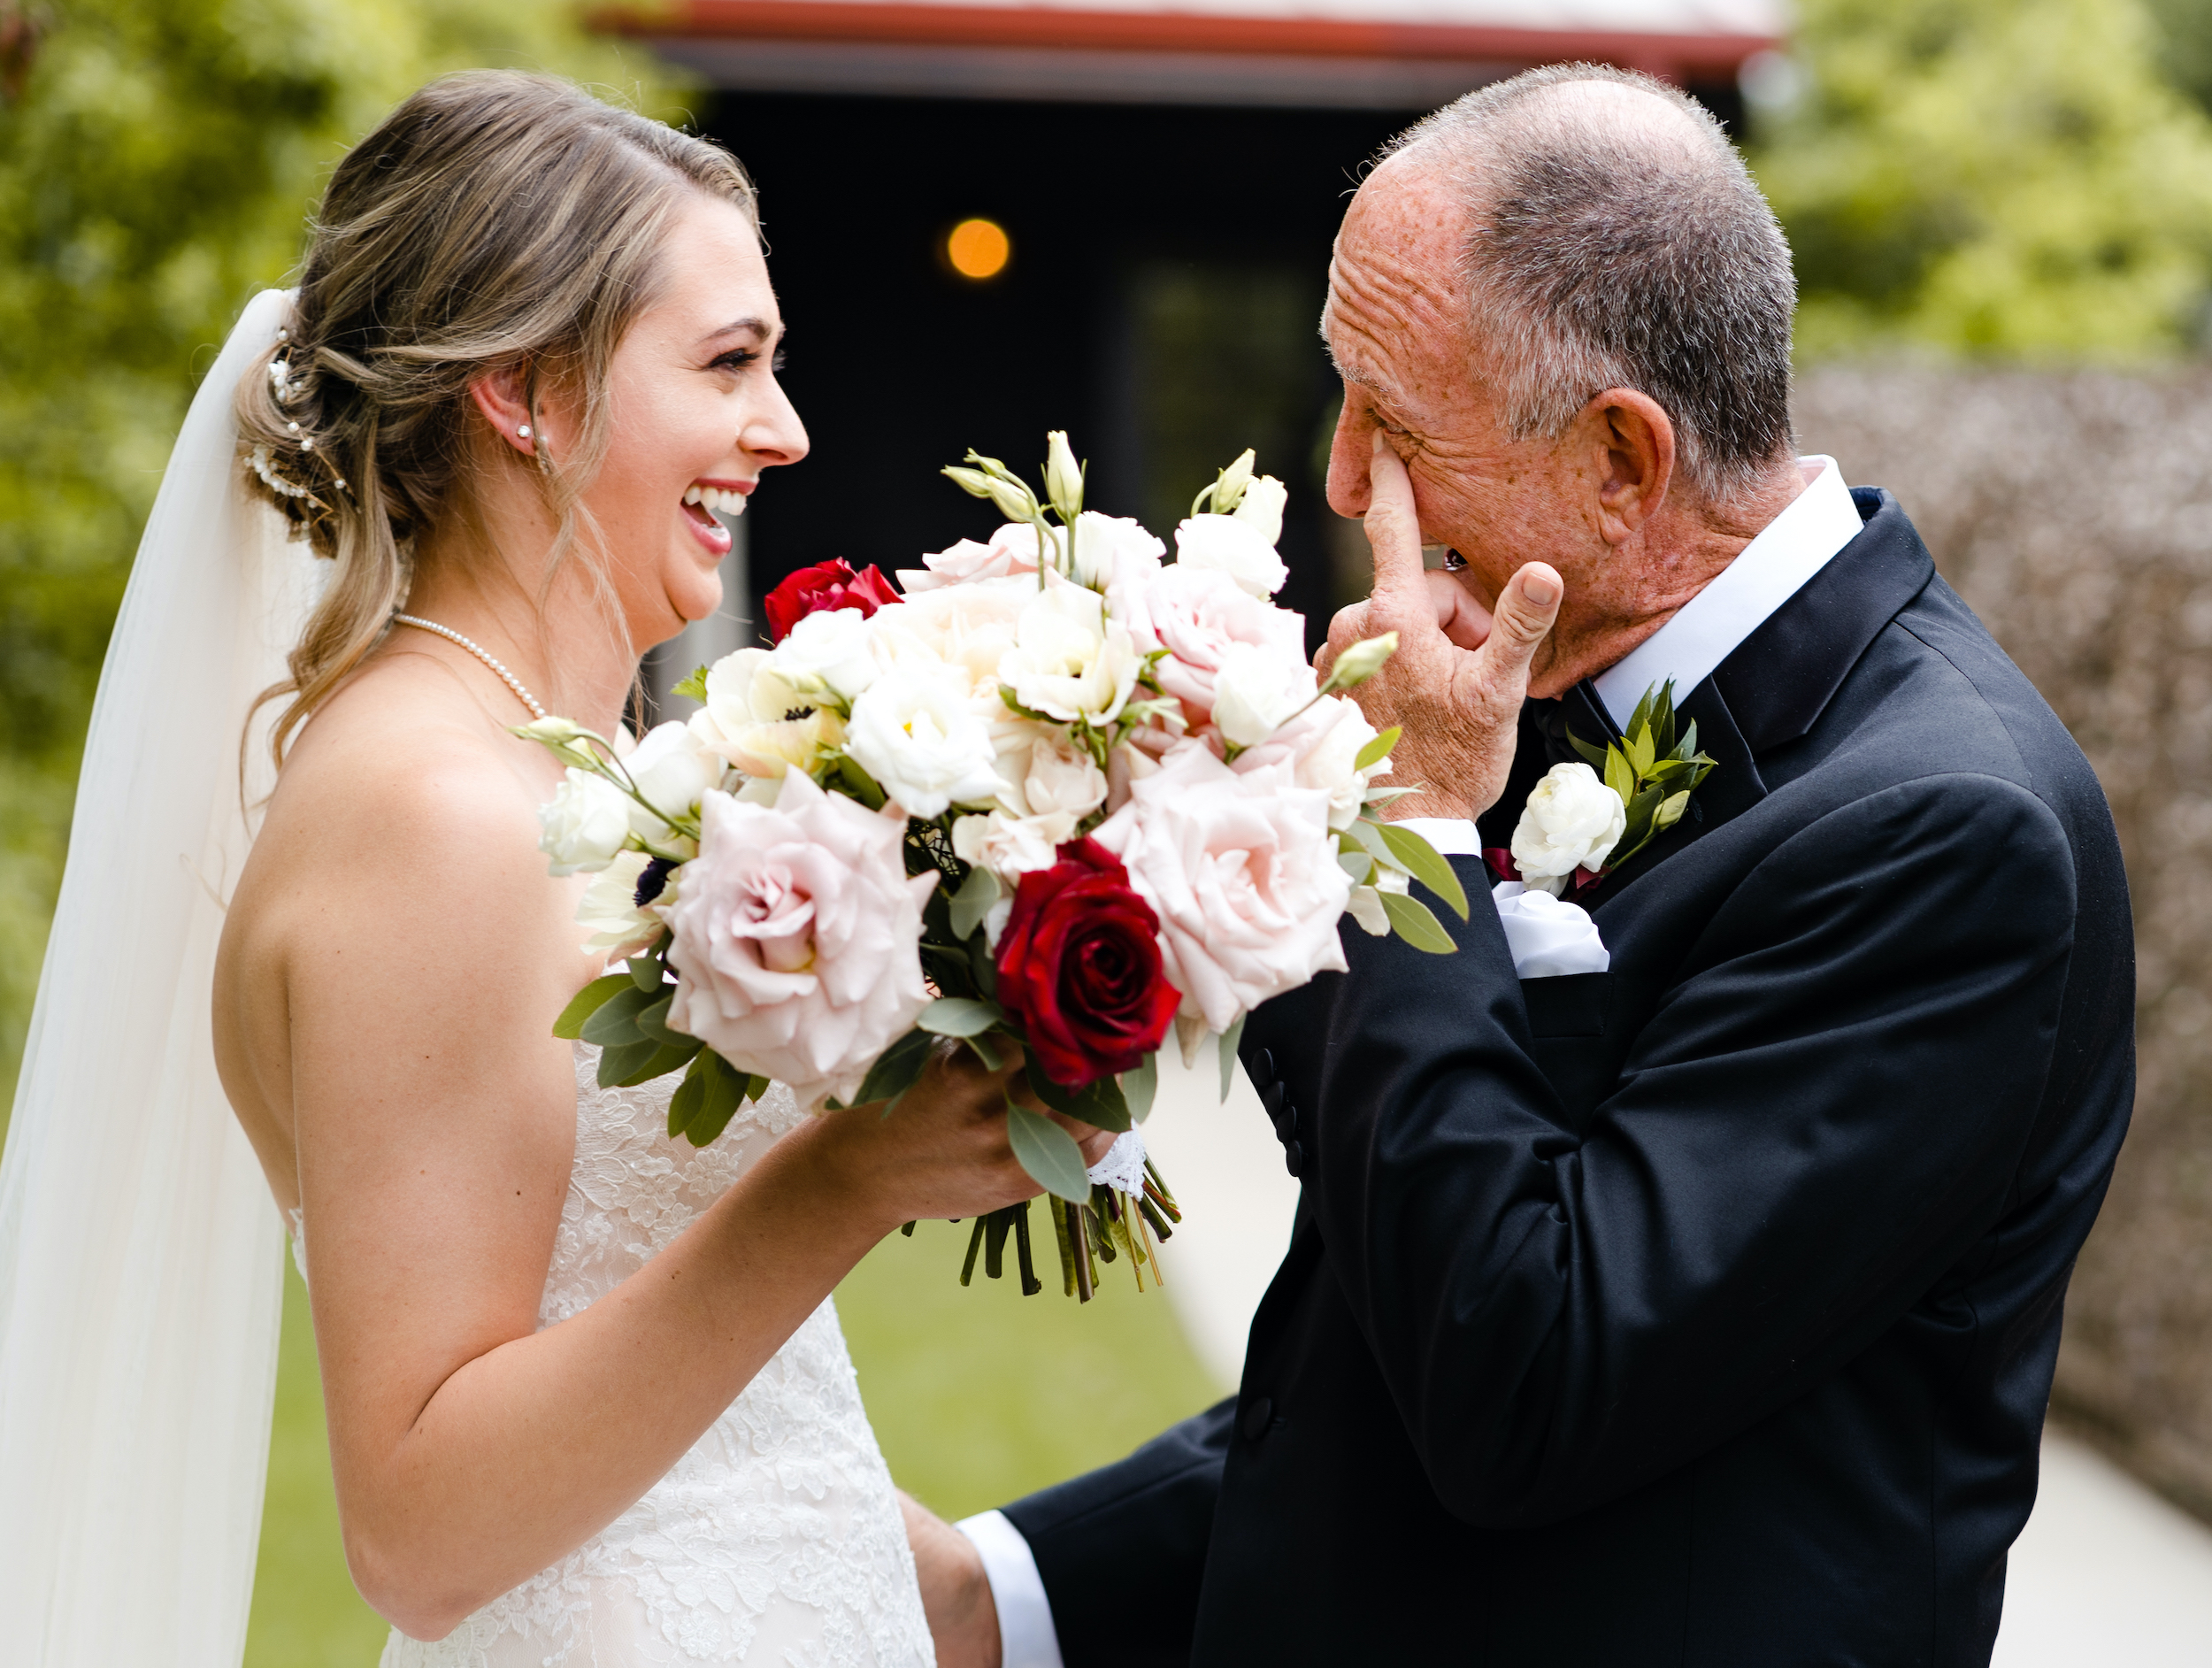 The bride does her first look with her father, who wipes a tear from his eyes as he smiles.